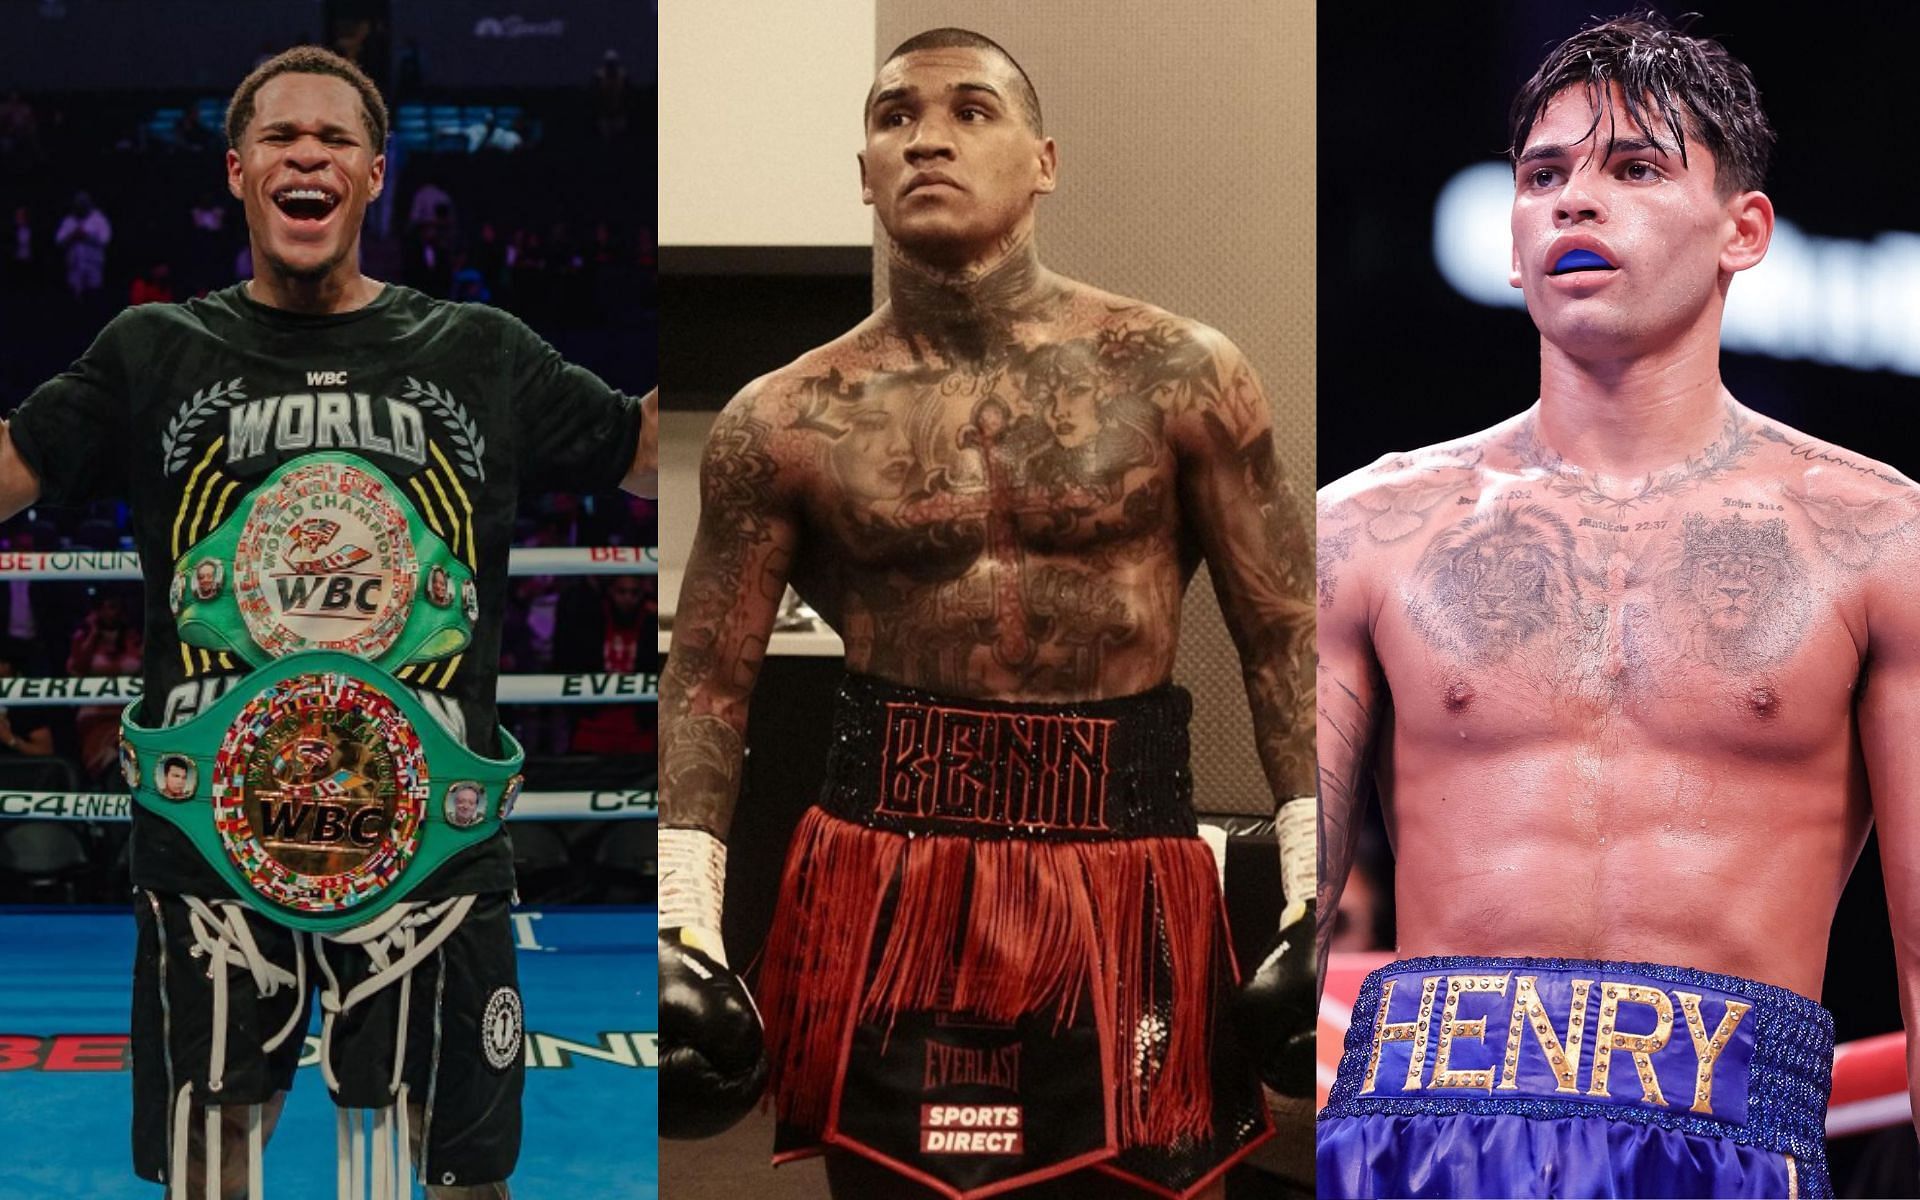 Conor Benn (middle) is willing to replace Ryan Garcia (right) if he withdraws from clash with Devin Haney (left) [Images Courtesy: @GettyImages, @conorbennofficial and @realdevinhaney on Instagram]